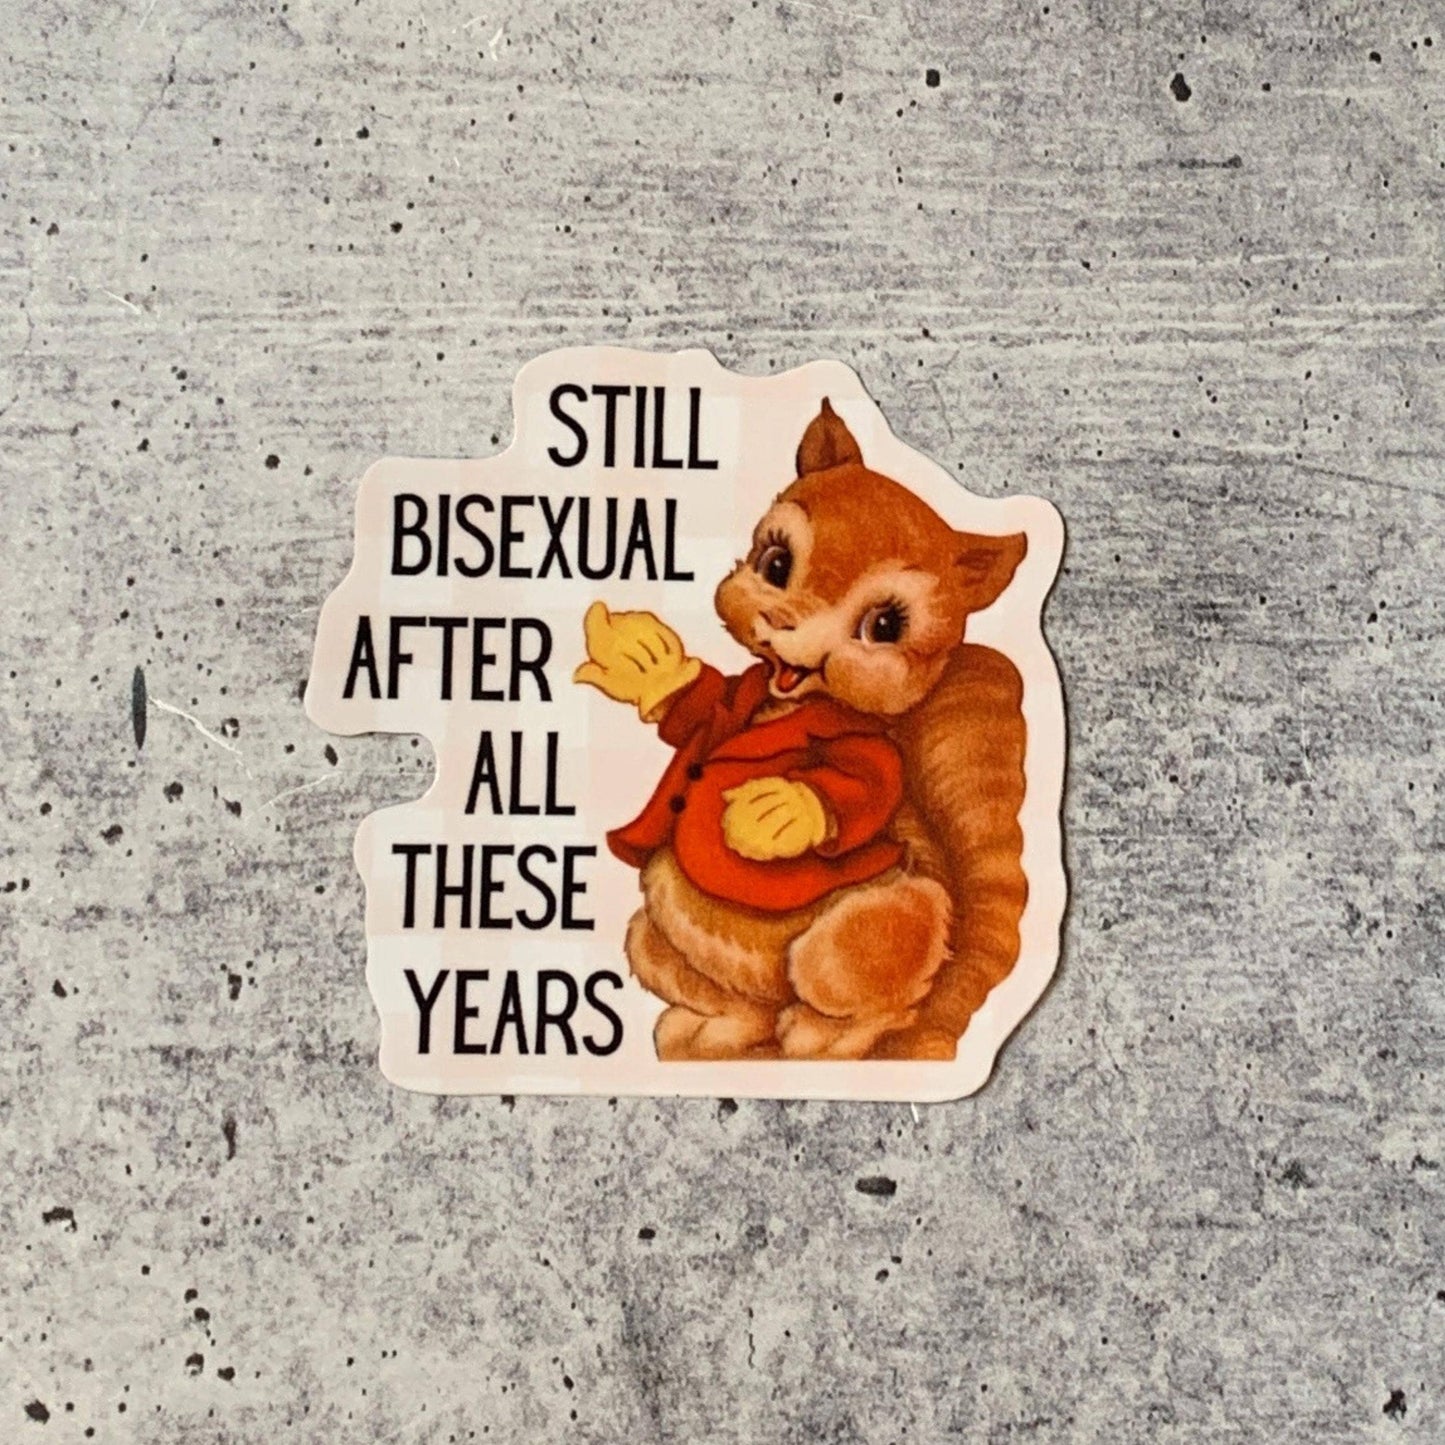 Still Bisexual After All These Years Vinyl Sticker | LGBTQ: Loose (save 50¢!)